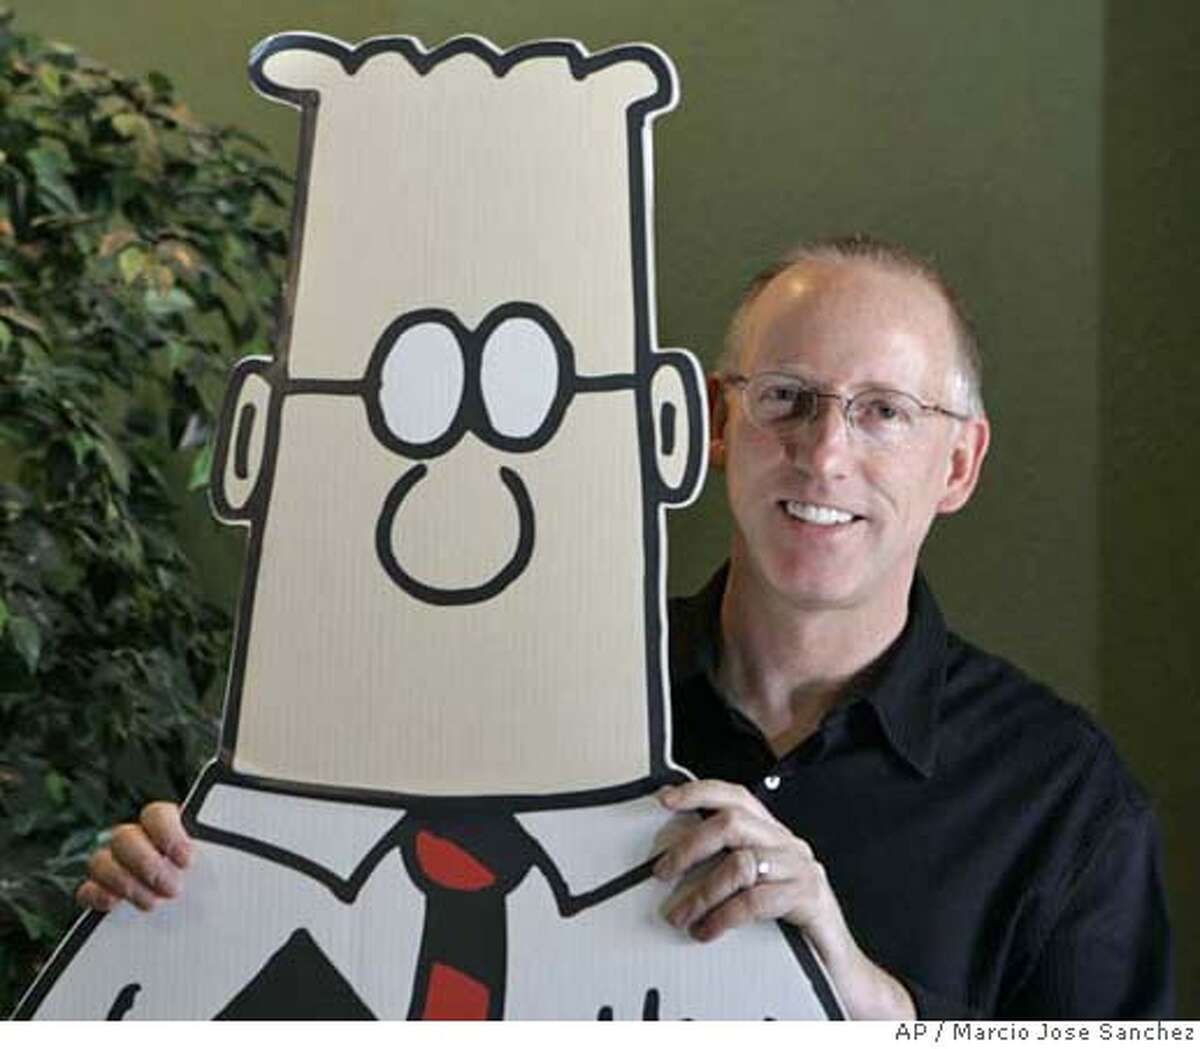 Scott Adams, creator of the comic strip Dilbert, poses for a portrait with the Dilbert character in his studio in Dublin, Calif., Thursday, Oct. 26, 2006. Adams, 49, appears to be a rare example of someone who has largely but not totally, recovered from Spasmodic Dysphonia, a mysterious disease in which parts of the brain controlling speech shut down or go haywire. As many as 30,000 Americans are afflicted, typically in their 40s and 50s, experts say. (AP Photo/Marcio Jose Sanchez)